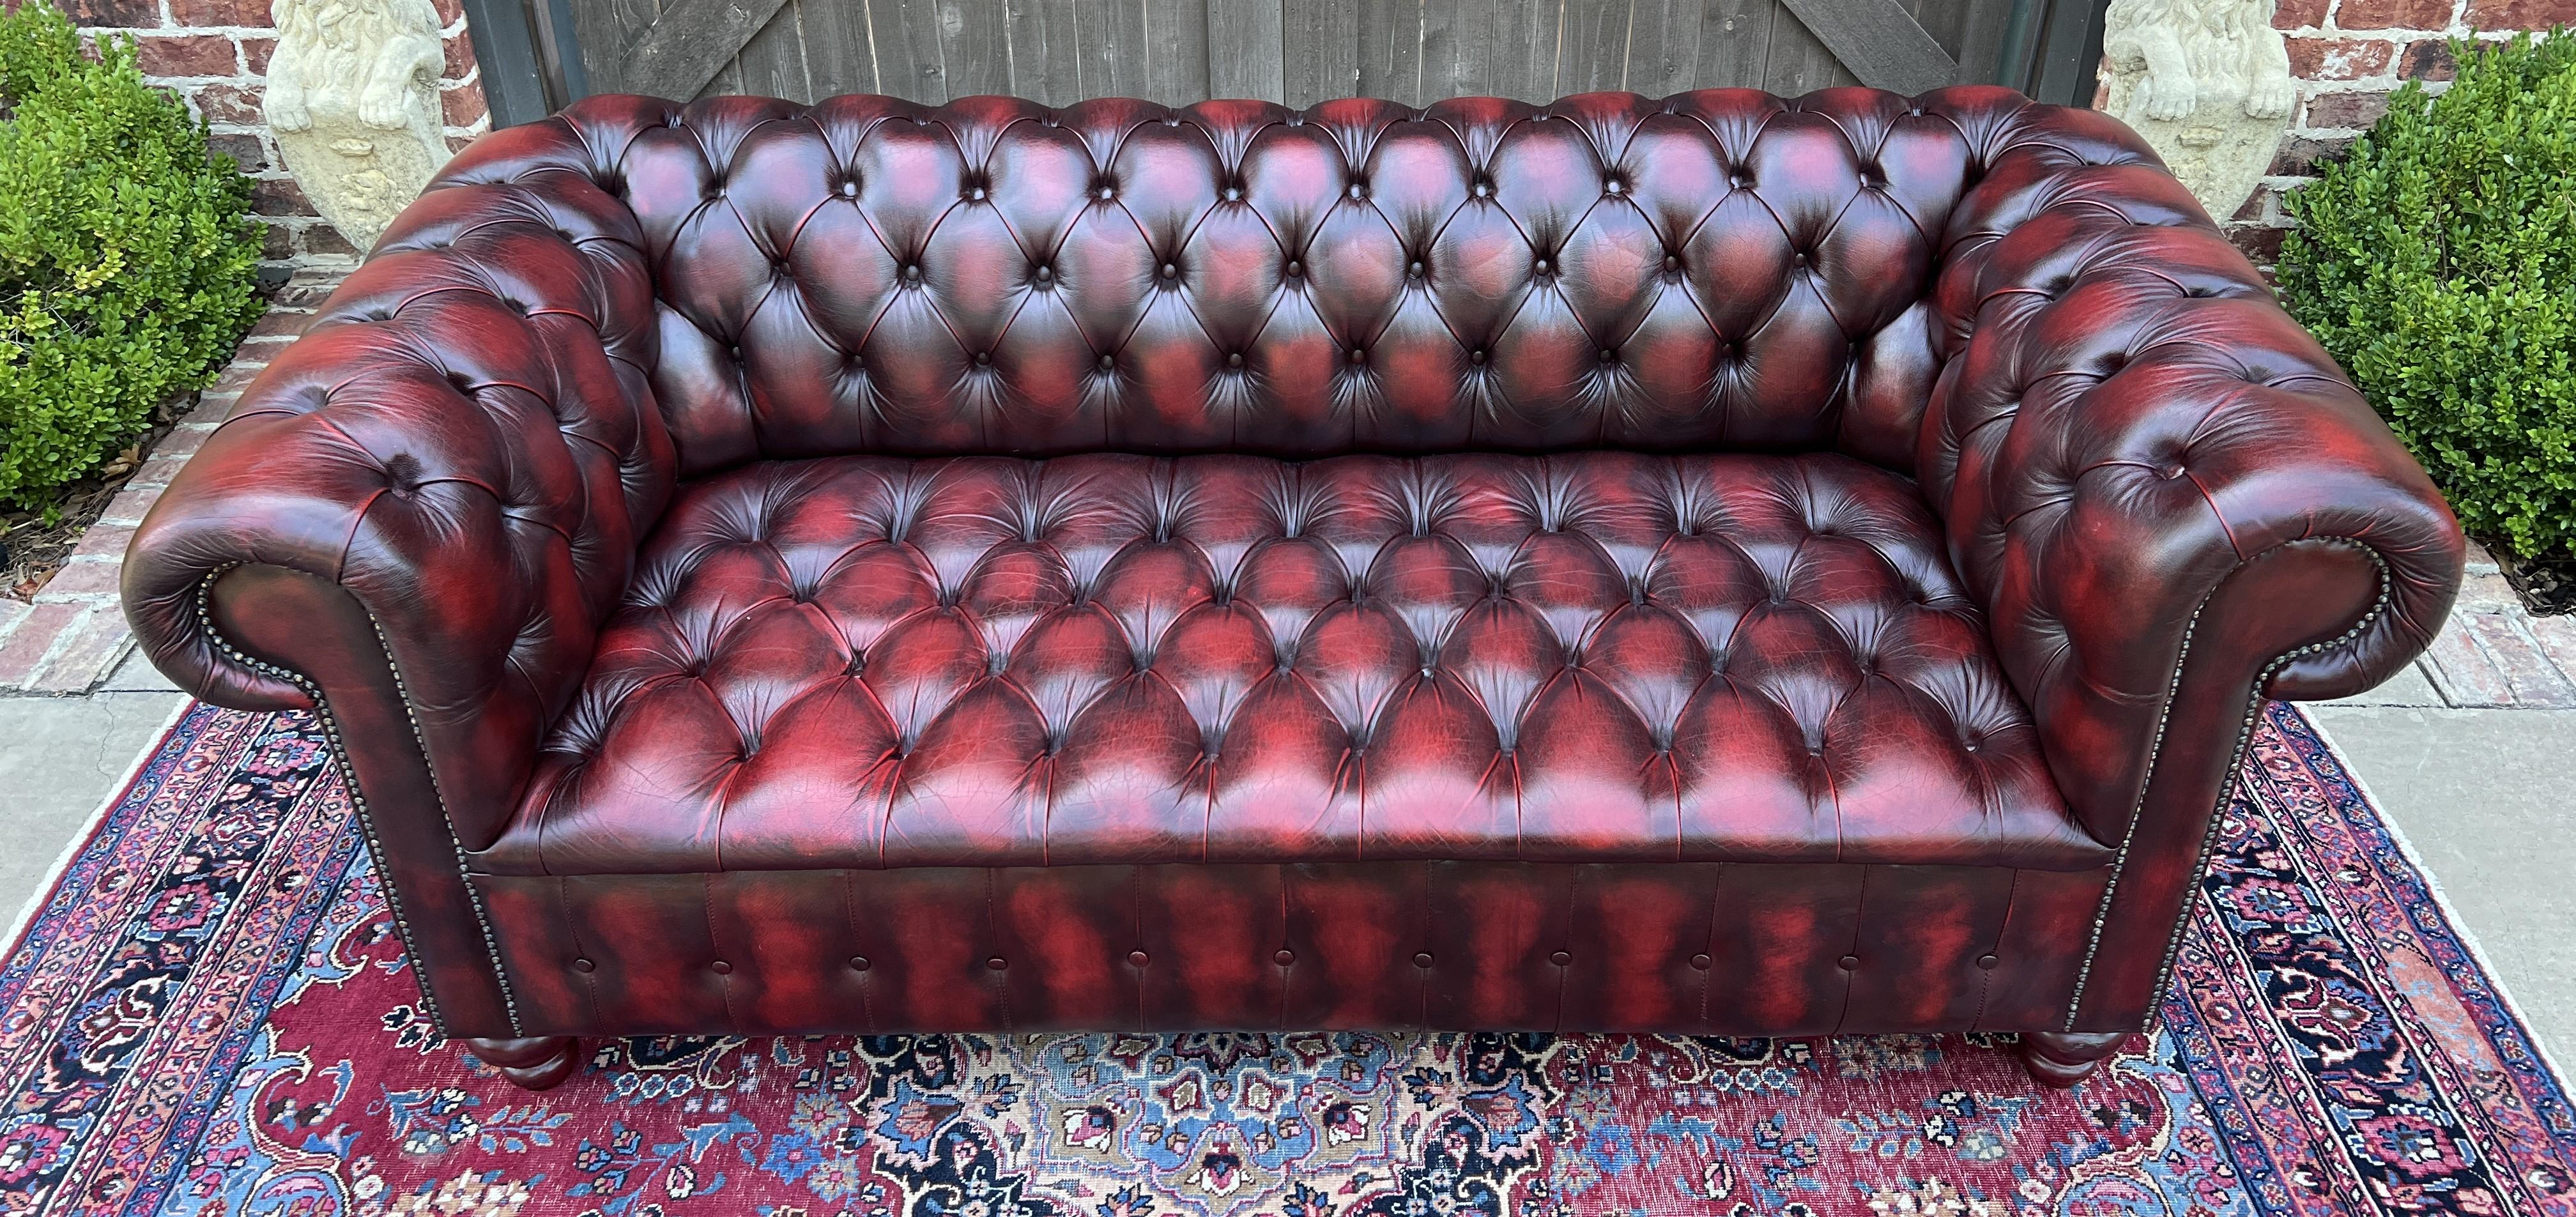 20th Century Vintage English Chesterfield Leather Sofa Tufted Seat Oxblood Red Mid-Century #2